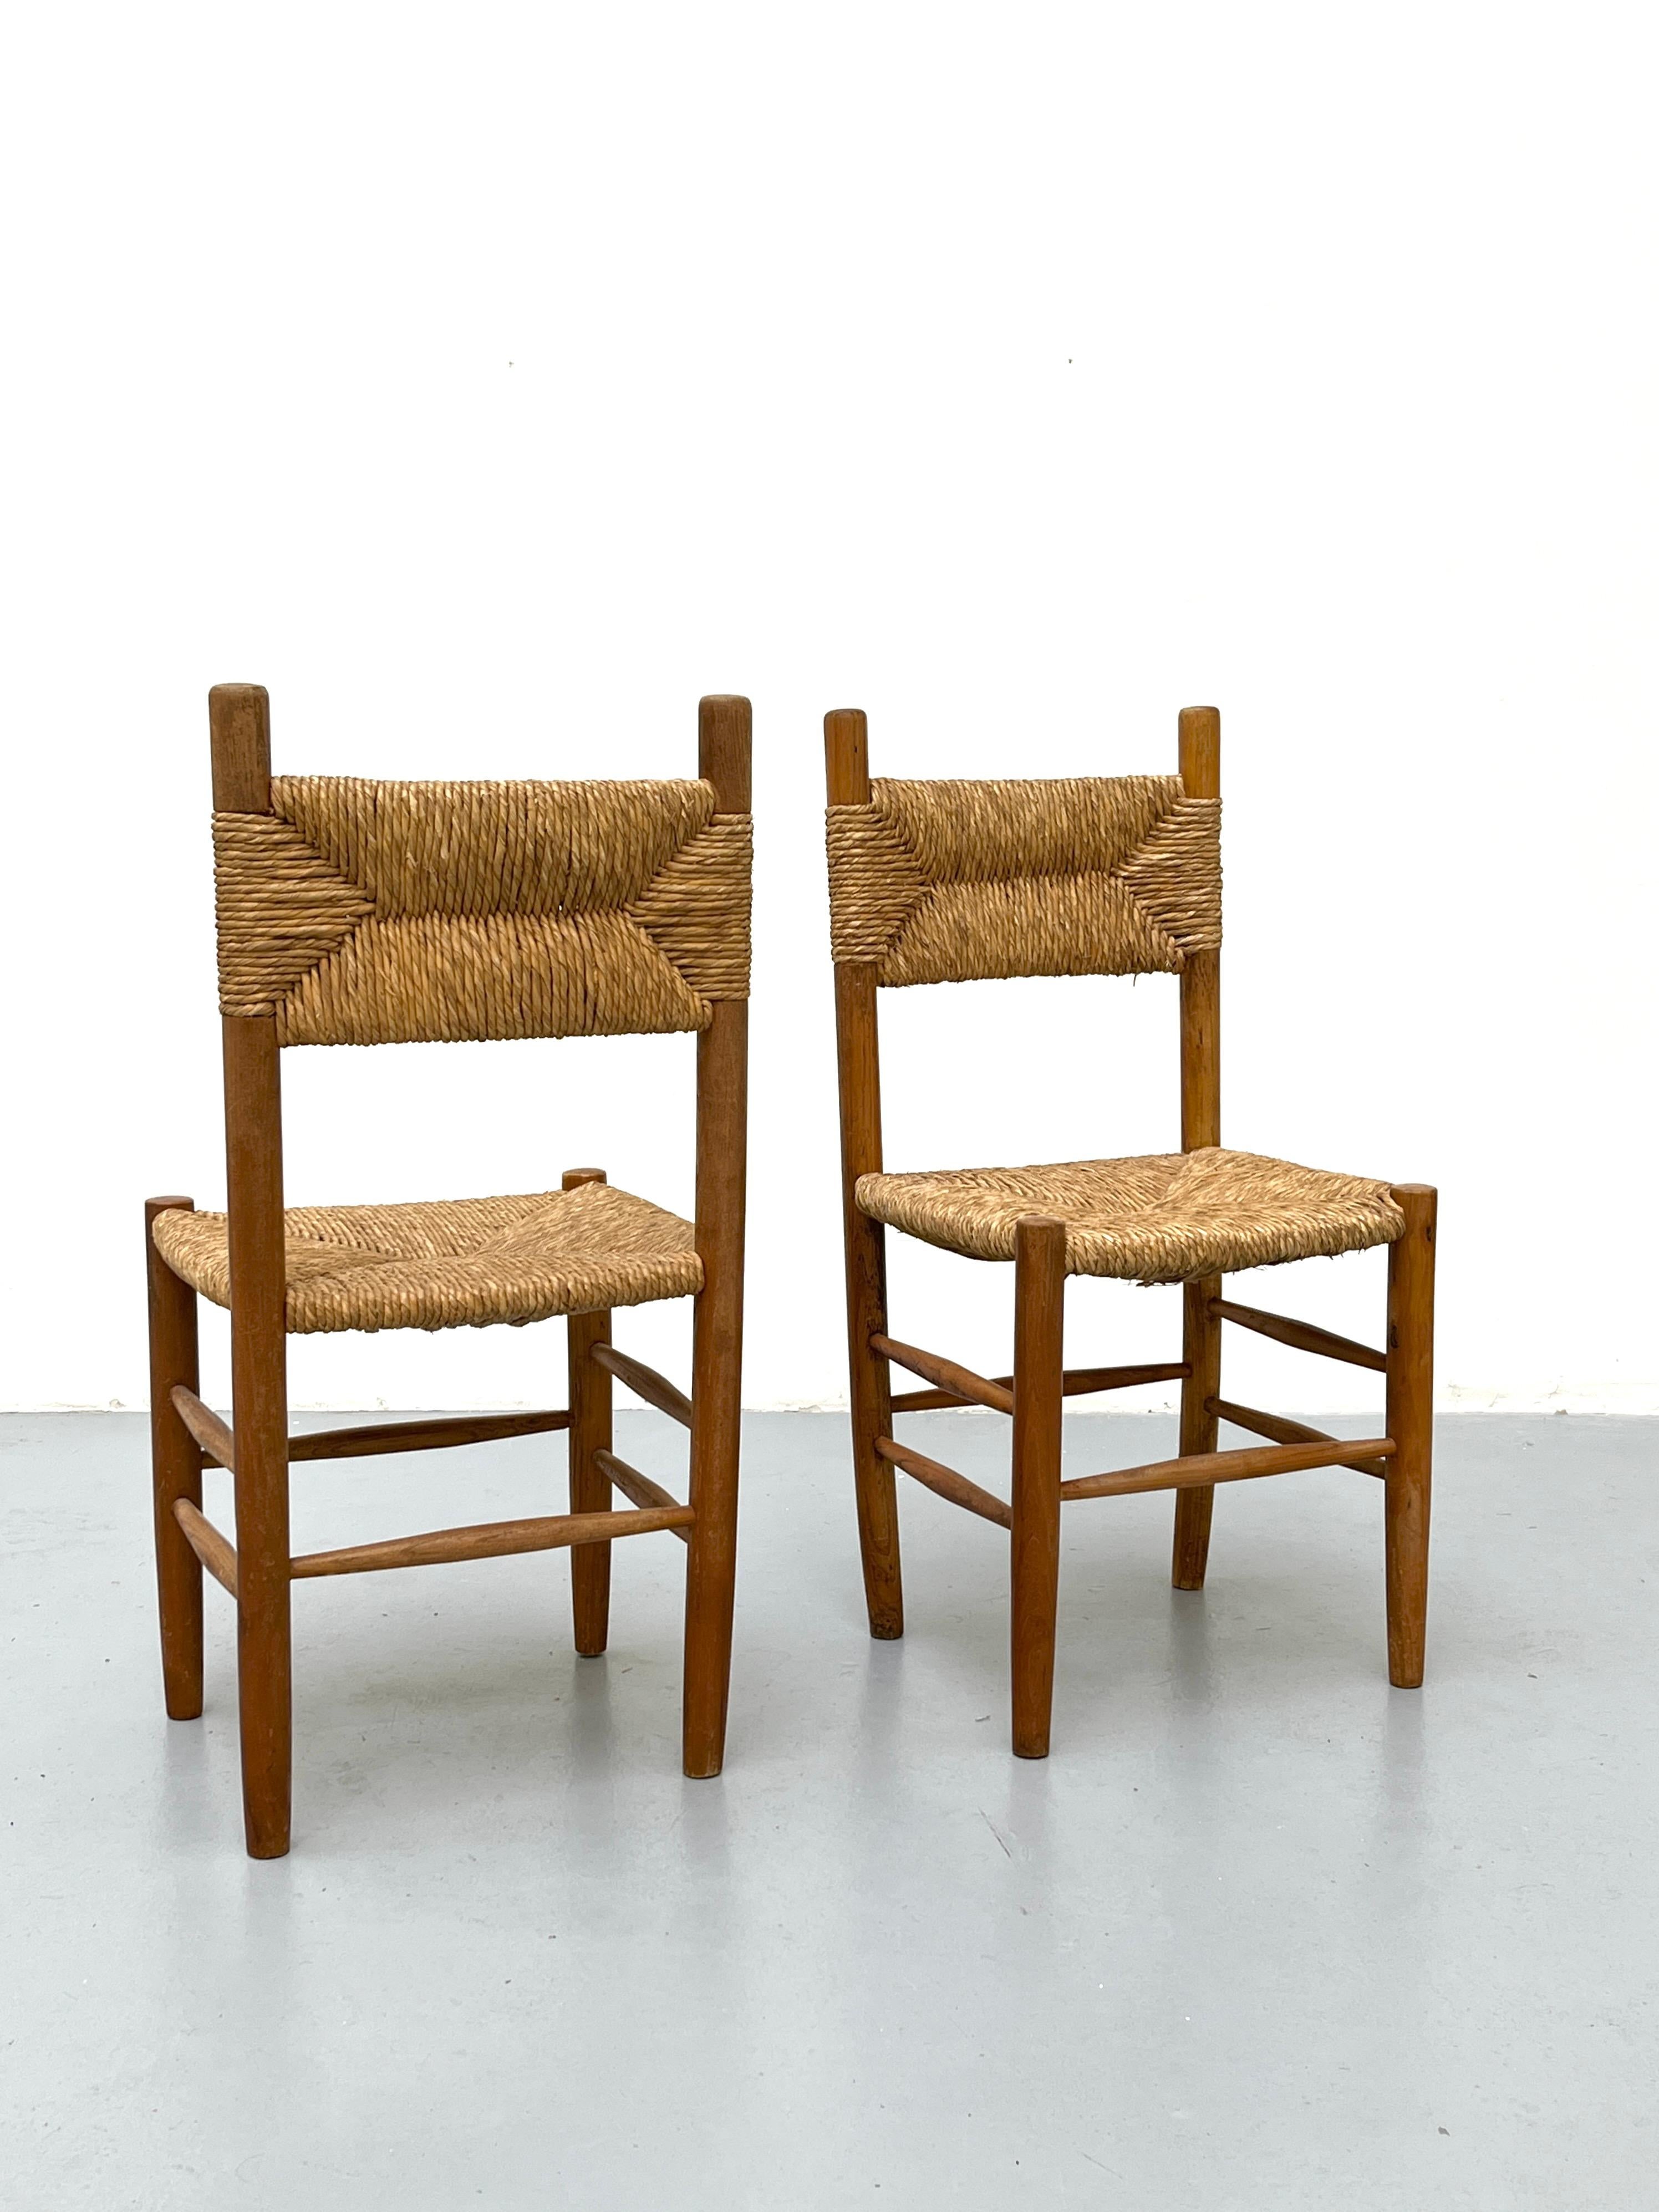 Pair of beechwood chairs with straw seat in the style of Charlotte Perriand

Charlotte Perriand was inspired by the Japanese rice straw designs. She uses the look of their mino, a rain cape, for her woven creations like the seats of the chairs.